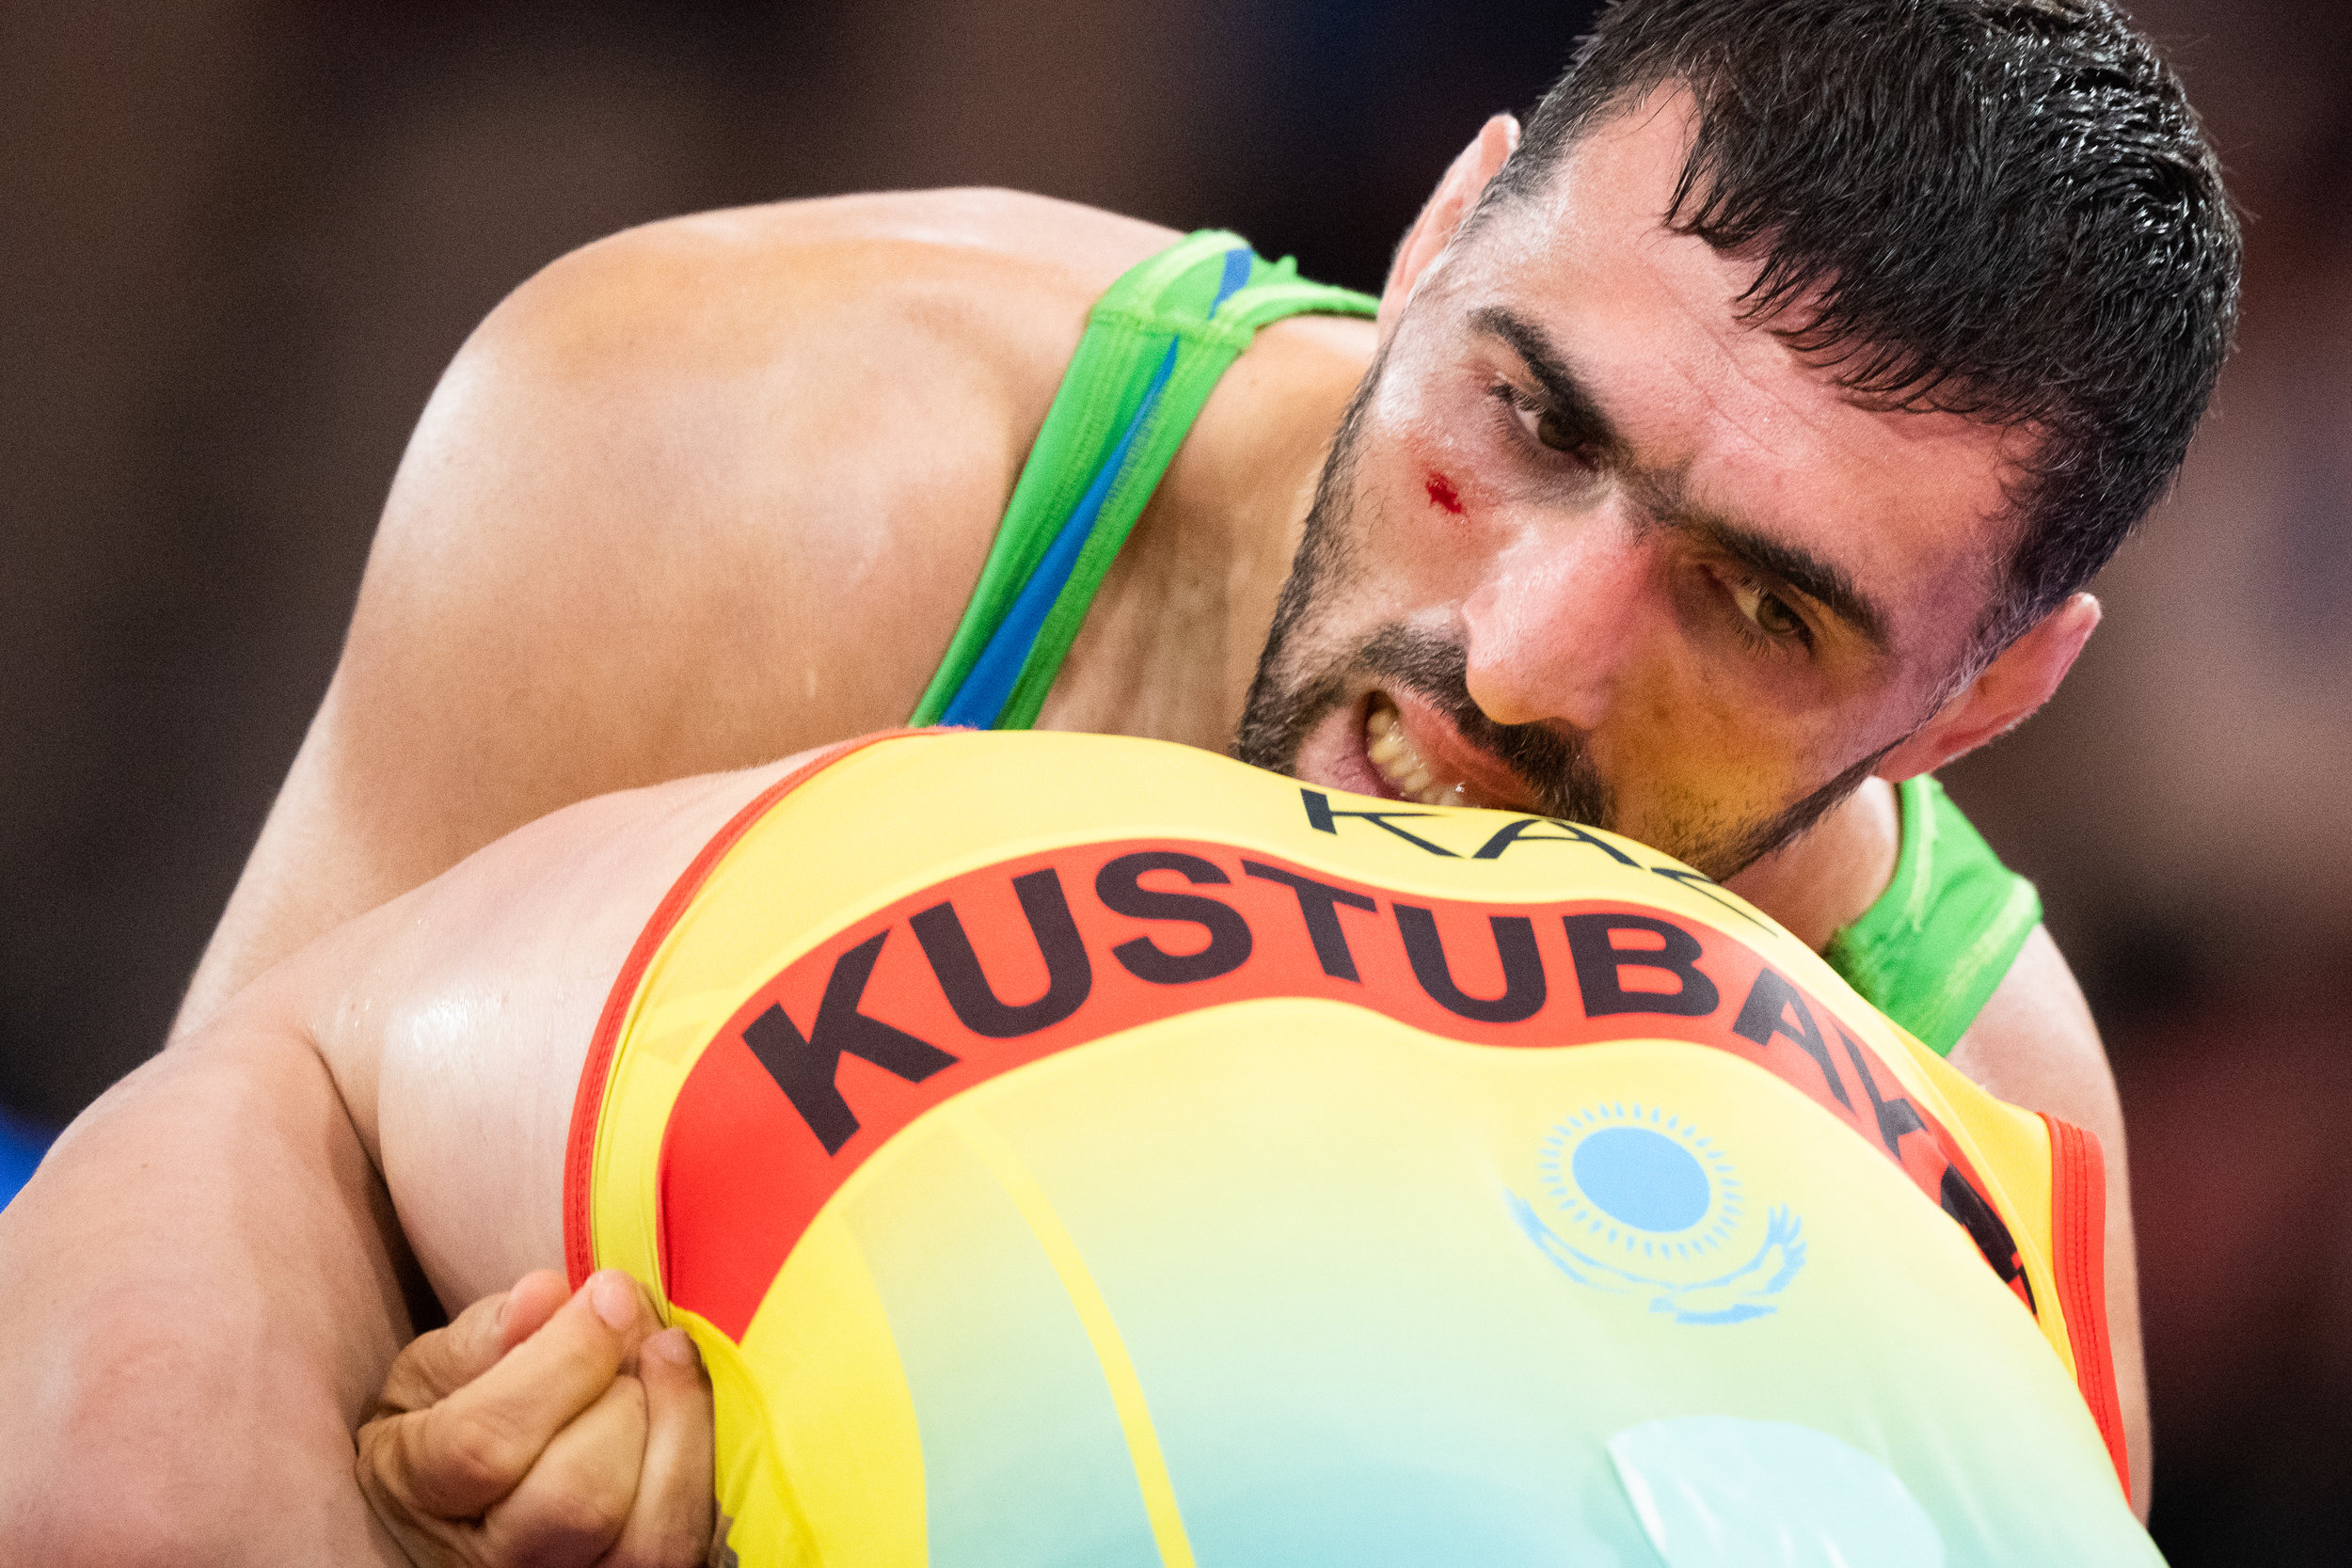 A Uzbek wrestler in action against his Kazakh opponent during his Greco Roman 87 kg match of the Asian Games at the Jakarta Convention Centre.